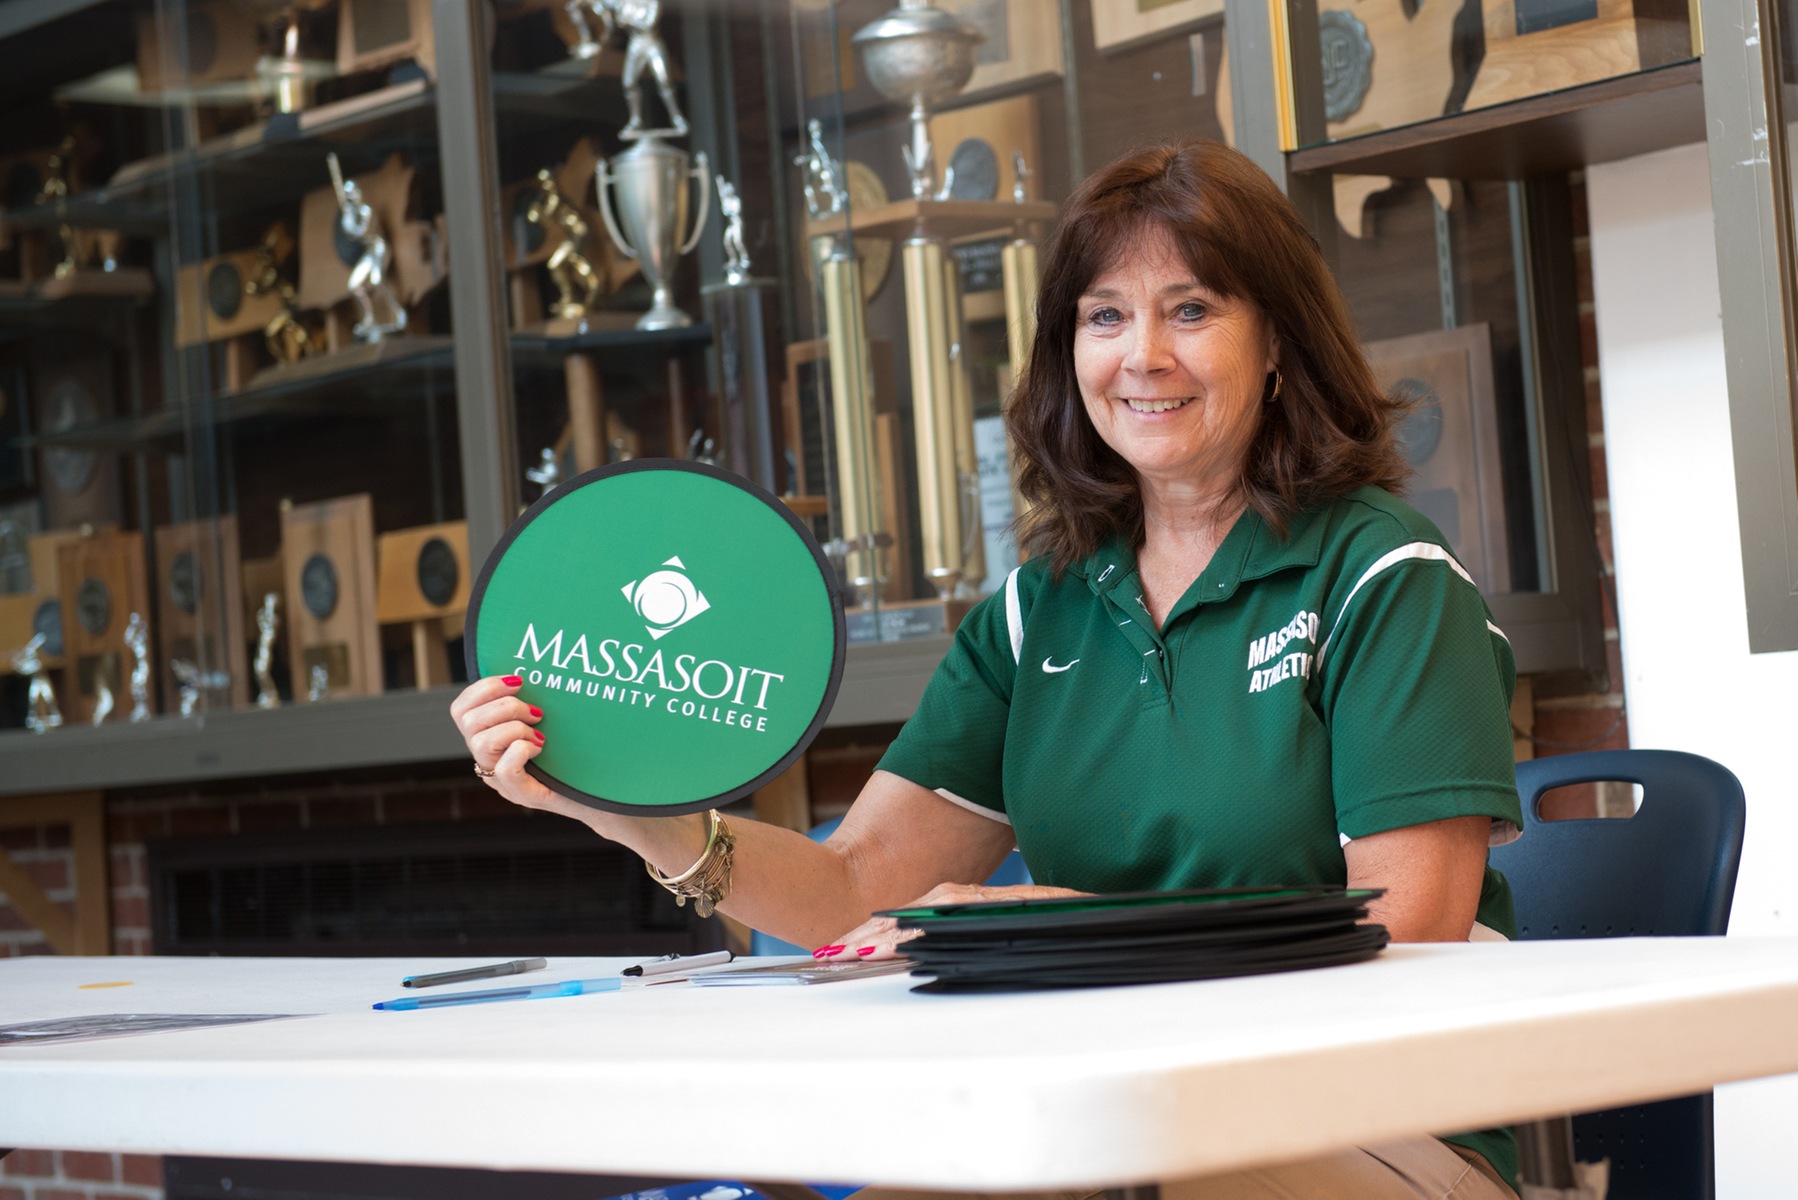 Associate Athletics Director Roly Landers Retires After 30 Years at Massasoit